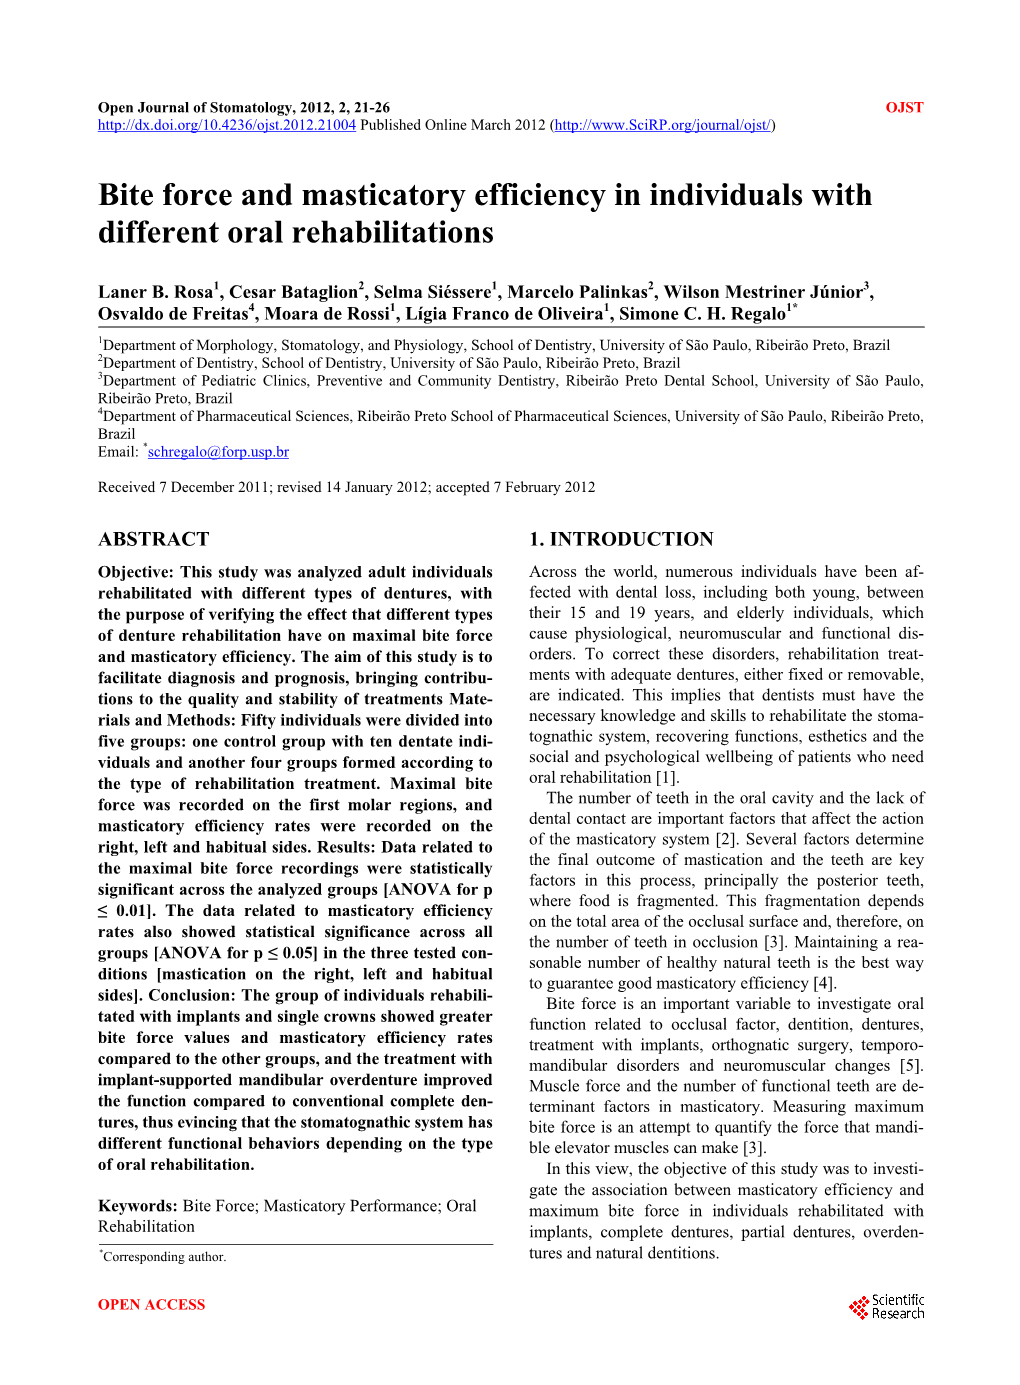 Bite Force and Masticatory Efficiency in Individuals with Different Oral Rehabilitations